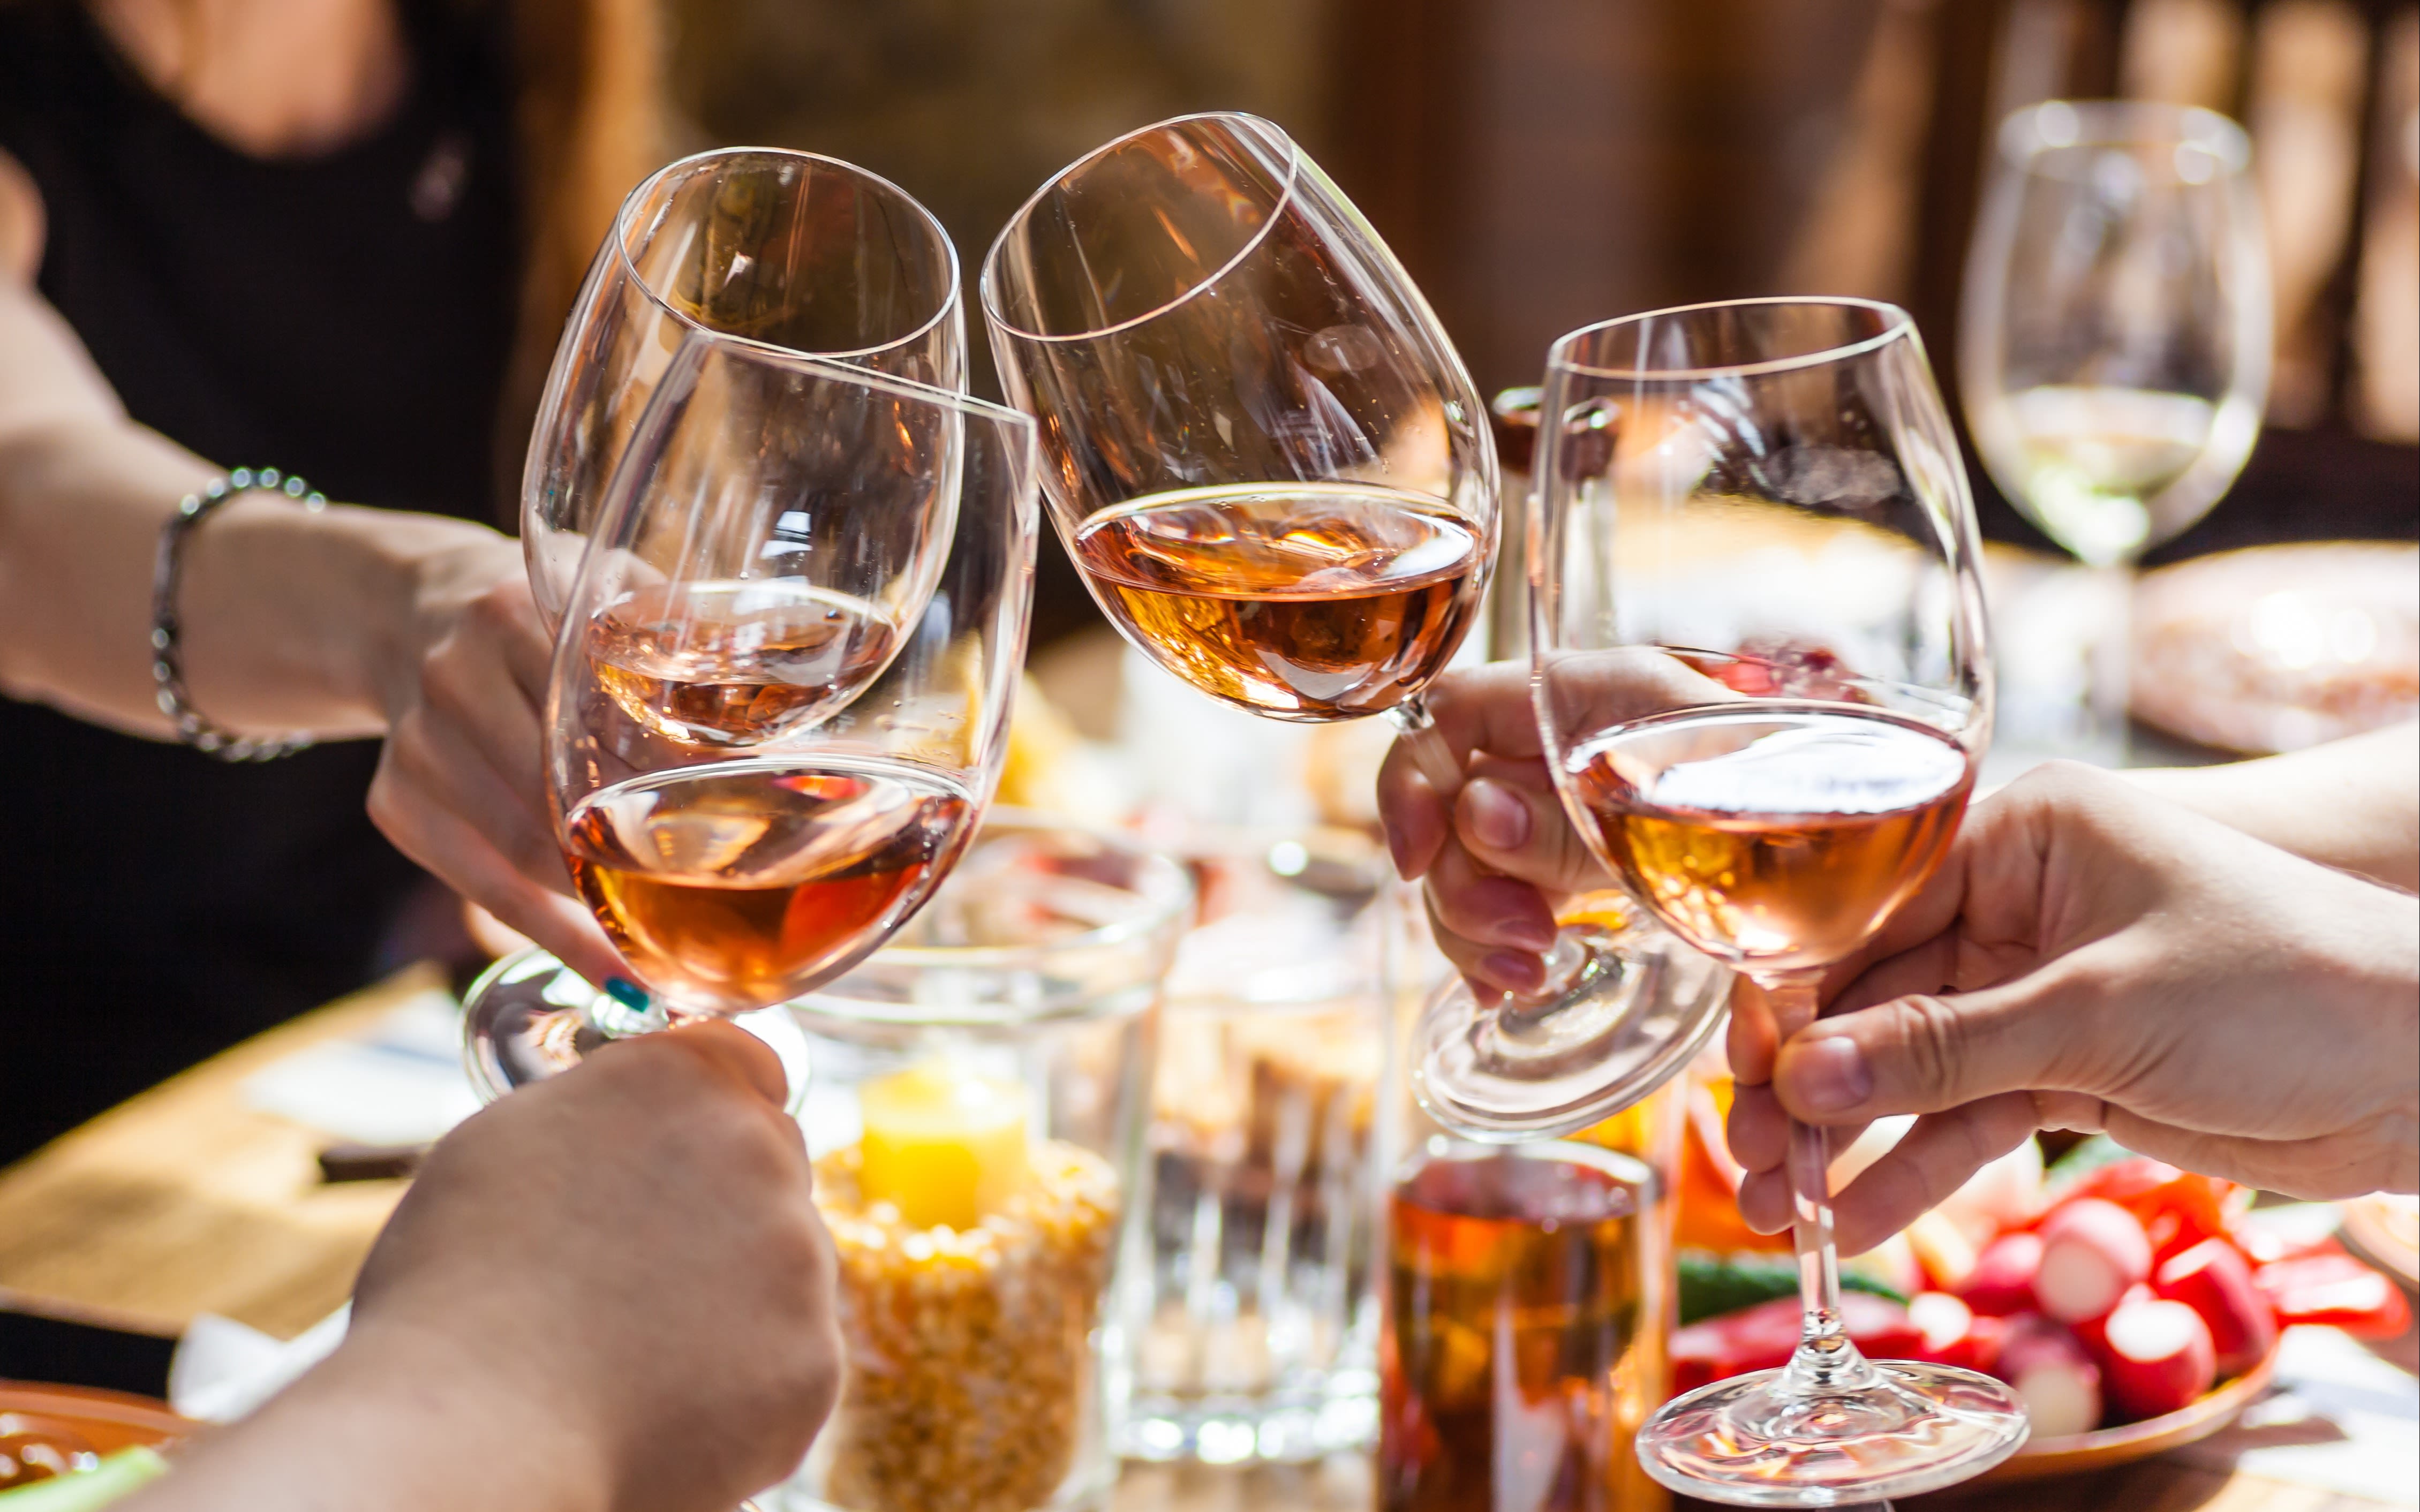 An image of people holding glasses of rosé wine